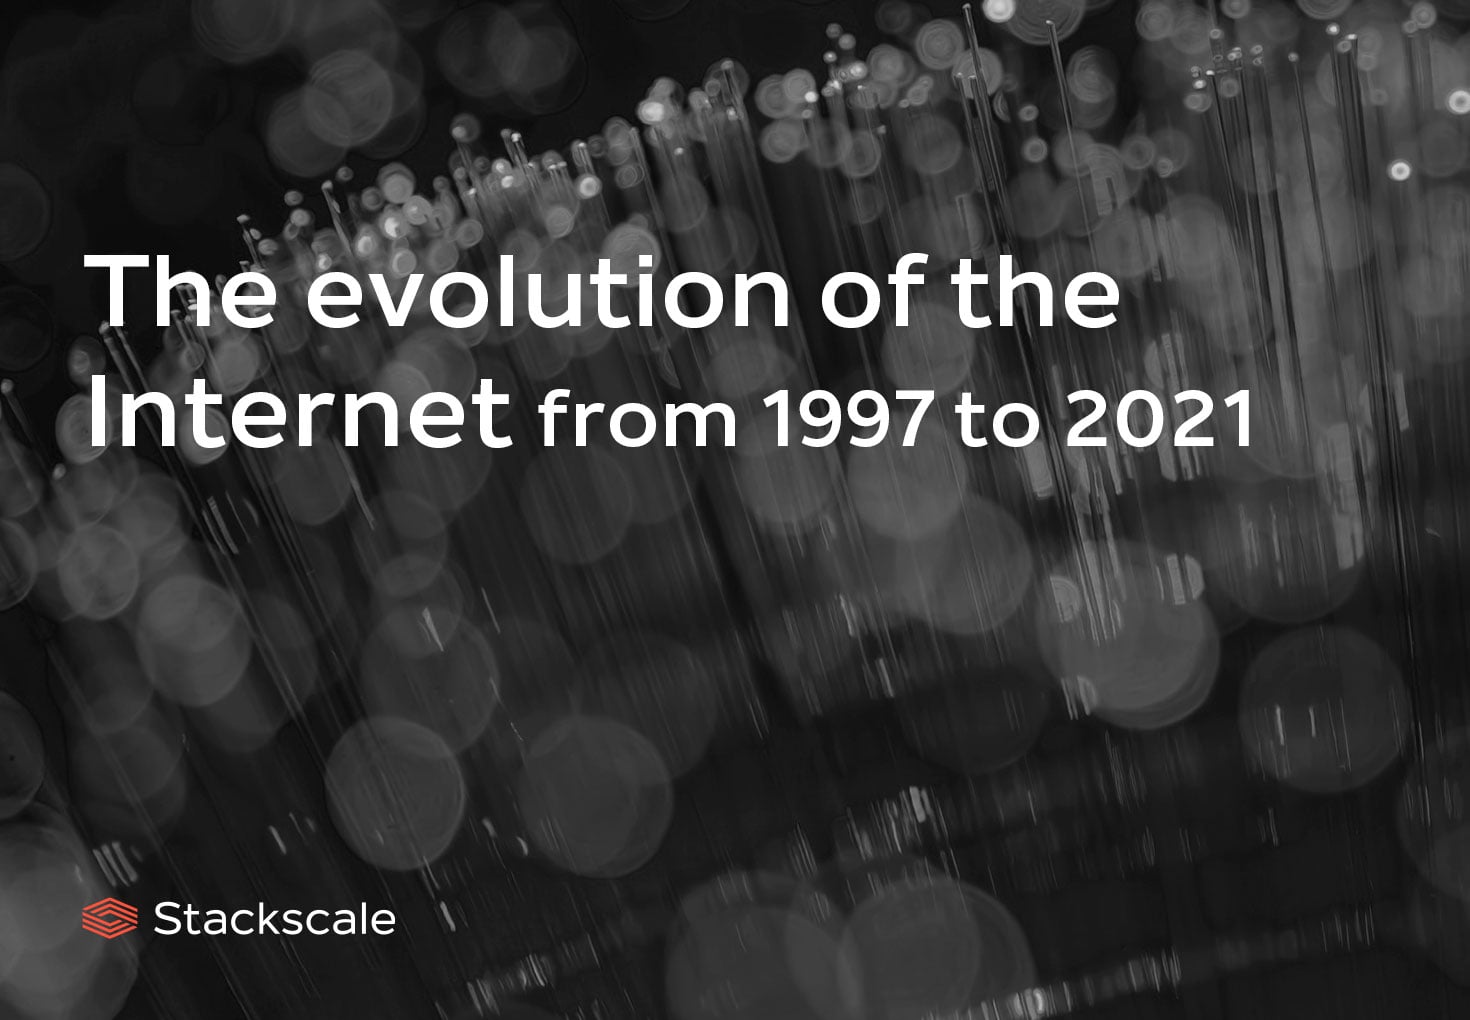 The evolution of the Internet from 1997 to 2021